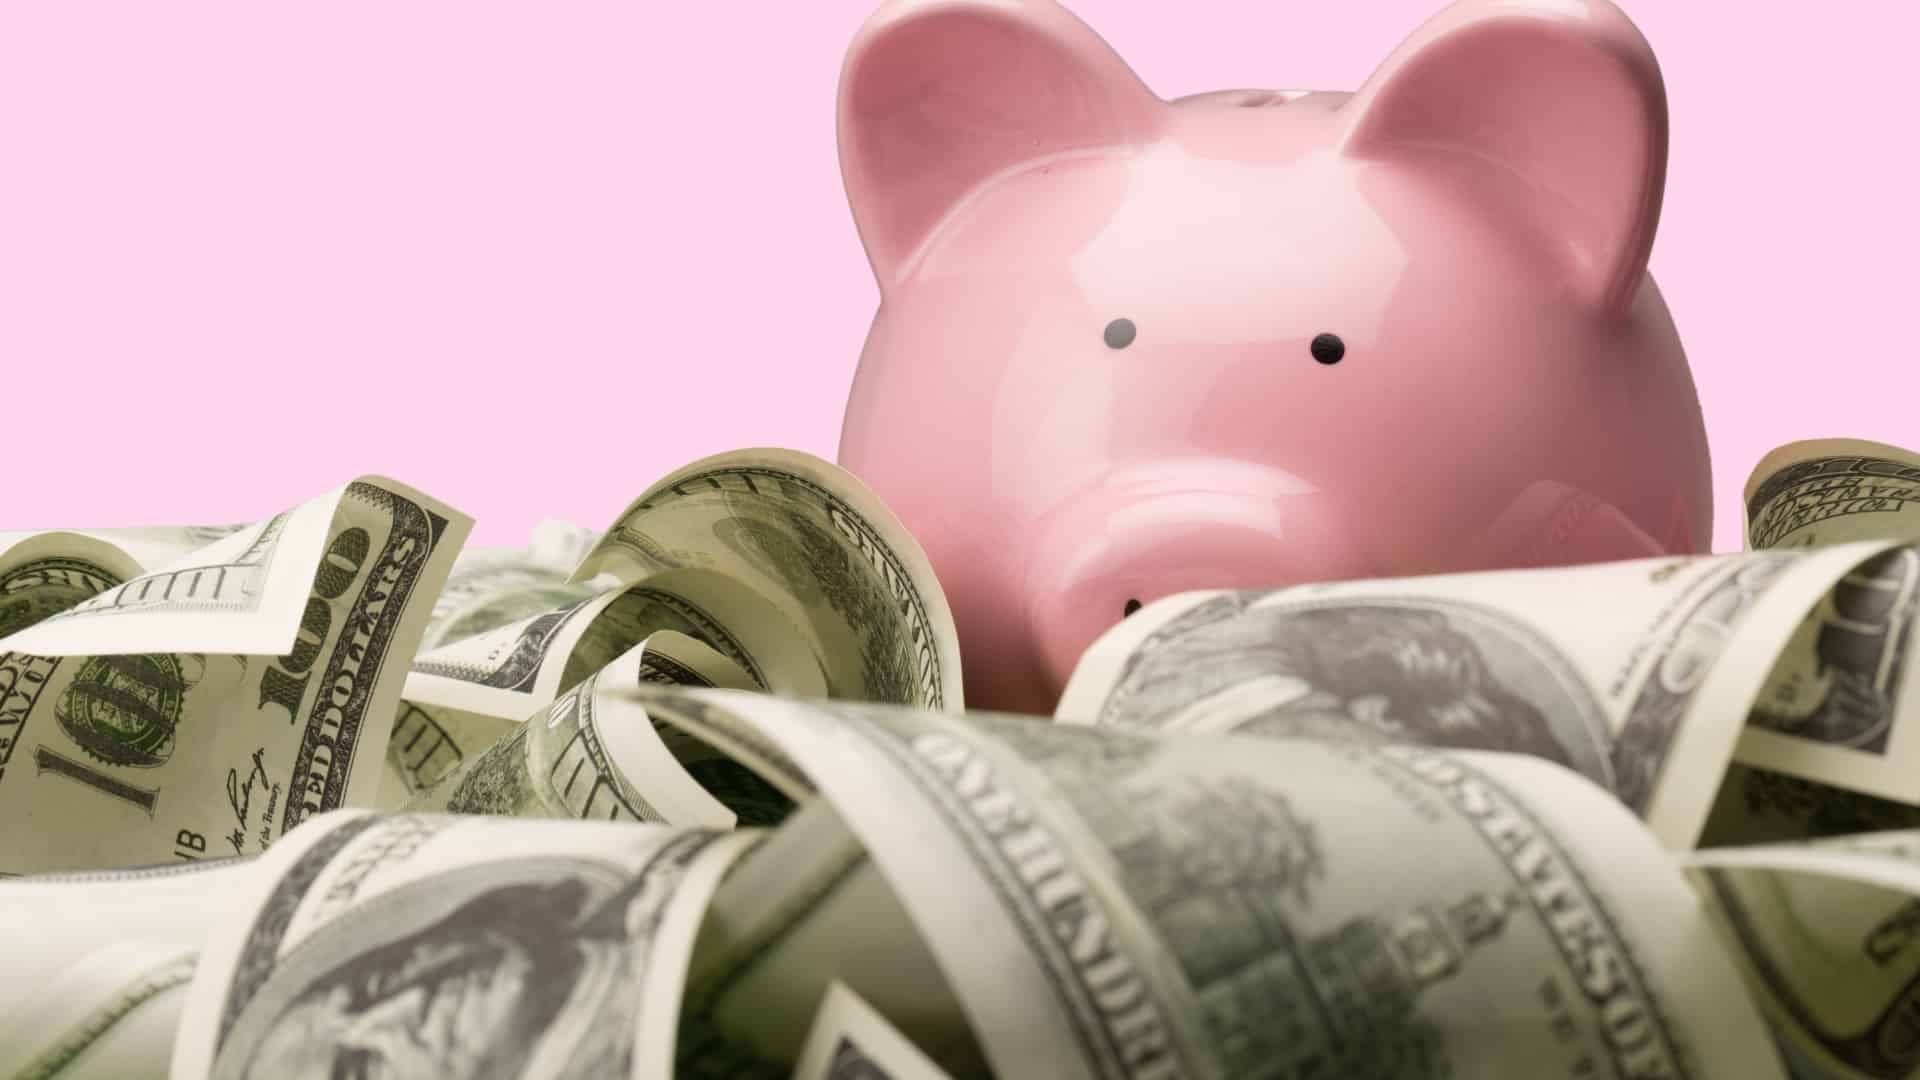 image of pink piggy bank surrounded by a pile on 100 dollar bills pink background
